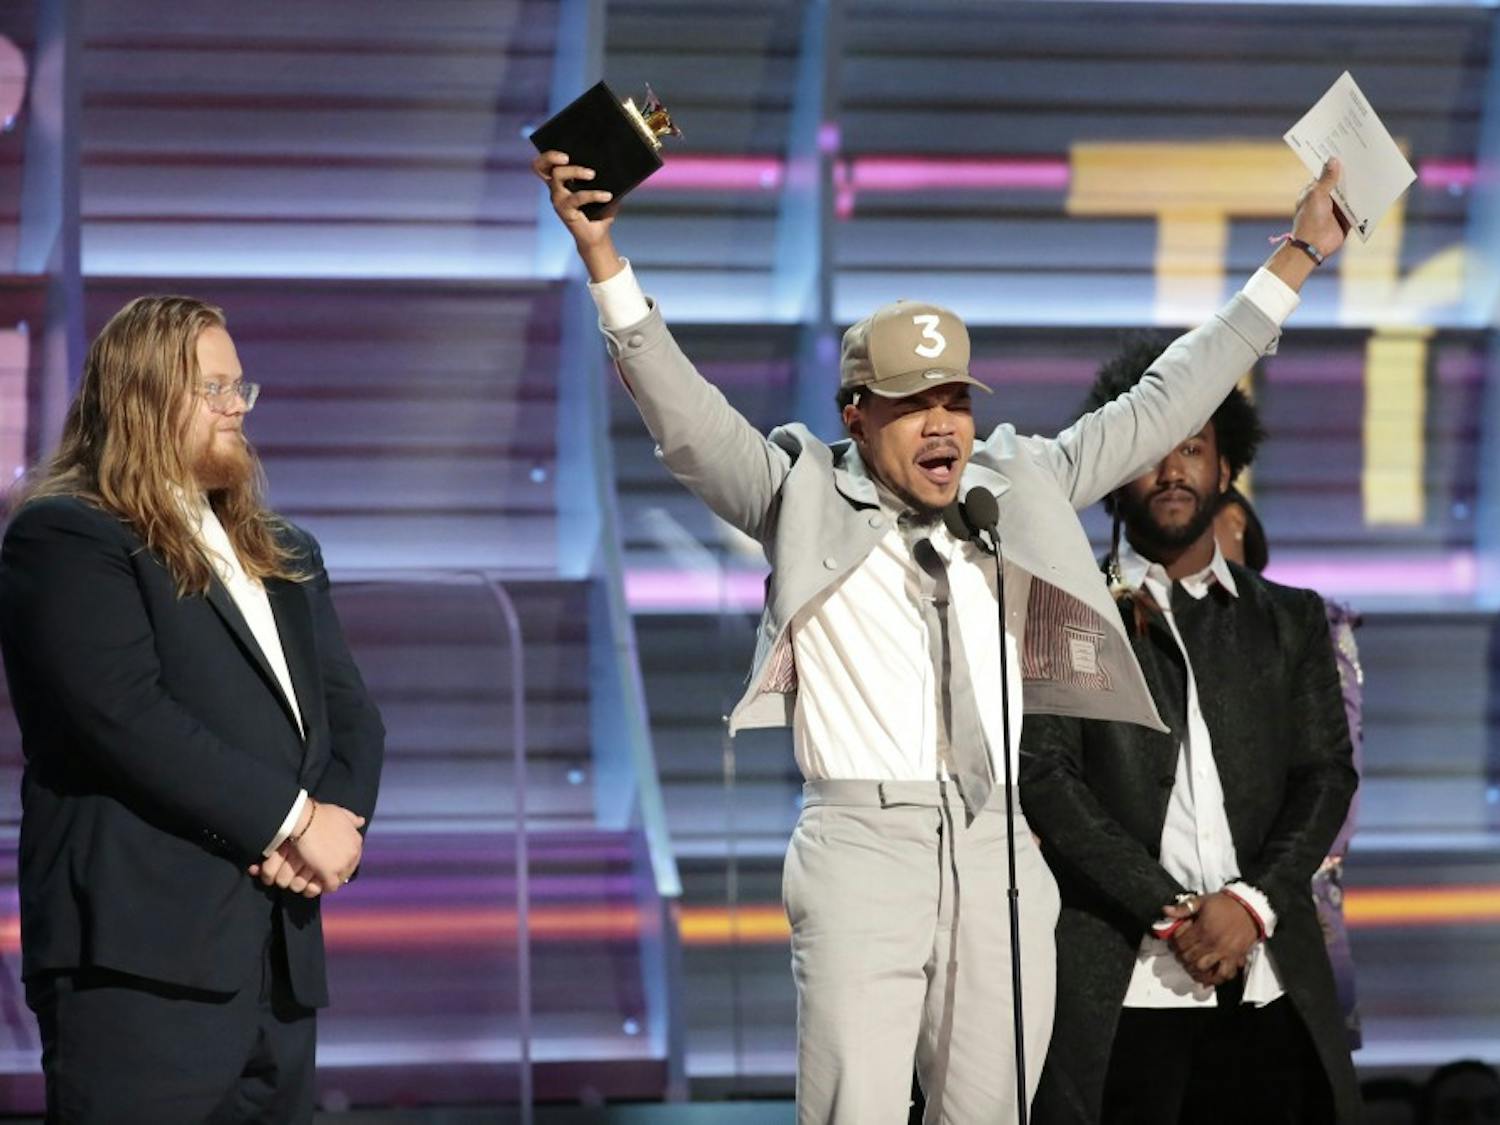 Chance the Rapper on stage during the 59th Annual Grammy Awards at Staples Center in Los Angeles on Sunday, Feb. 12, 2017. (Robert Gauthier/Los Angeles Times/TNS)